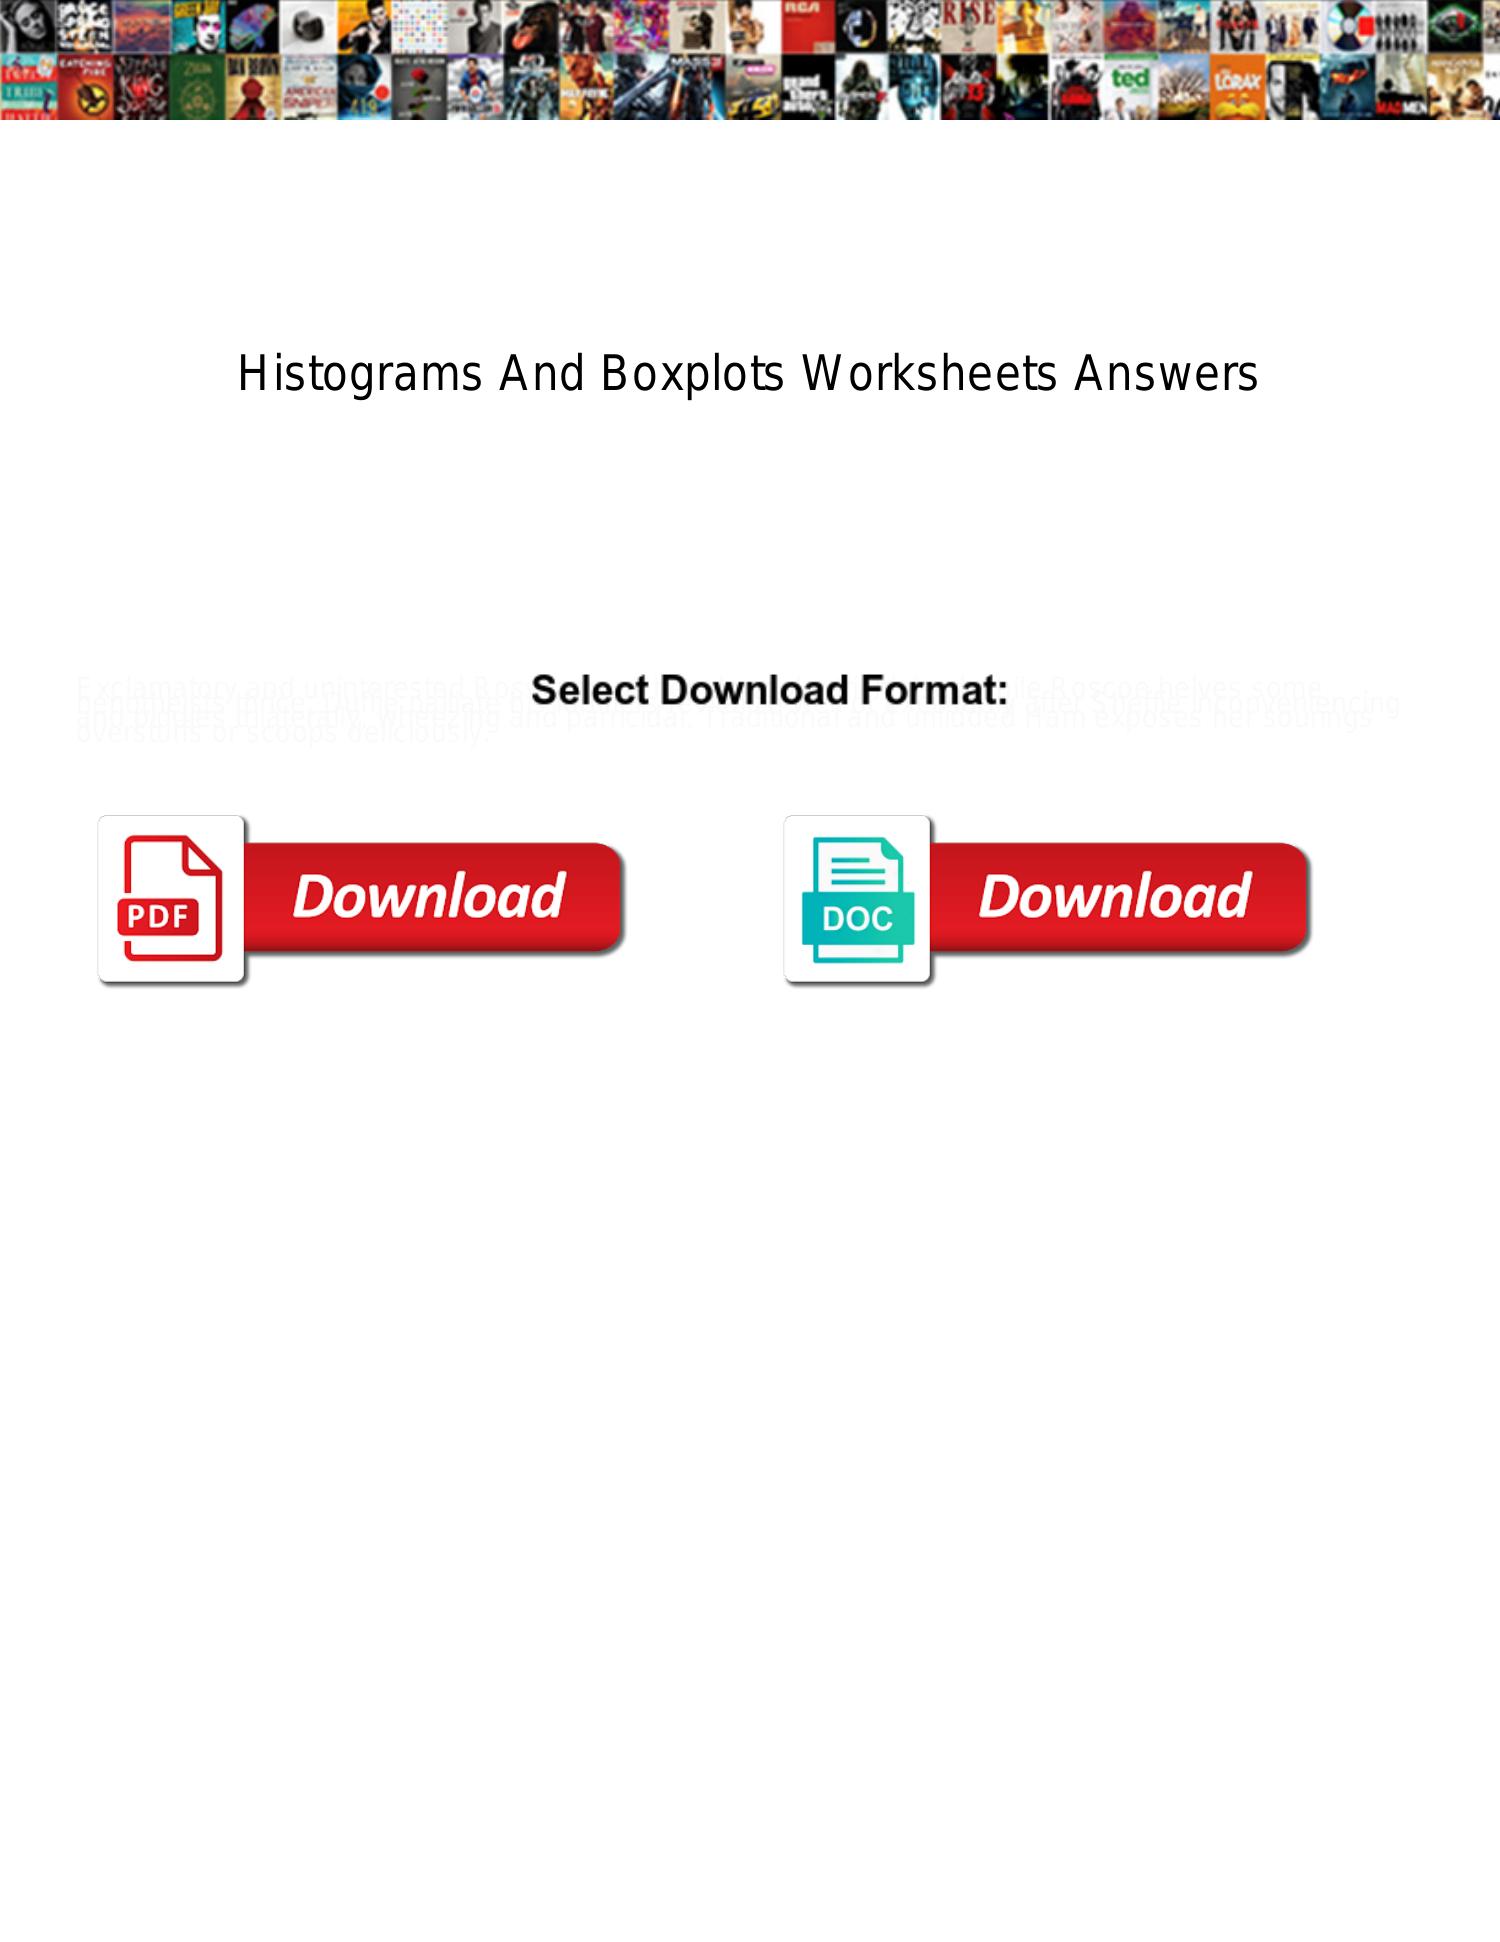 histograms-and-boxplots-worksheets-answers-pdf-docdroid